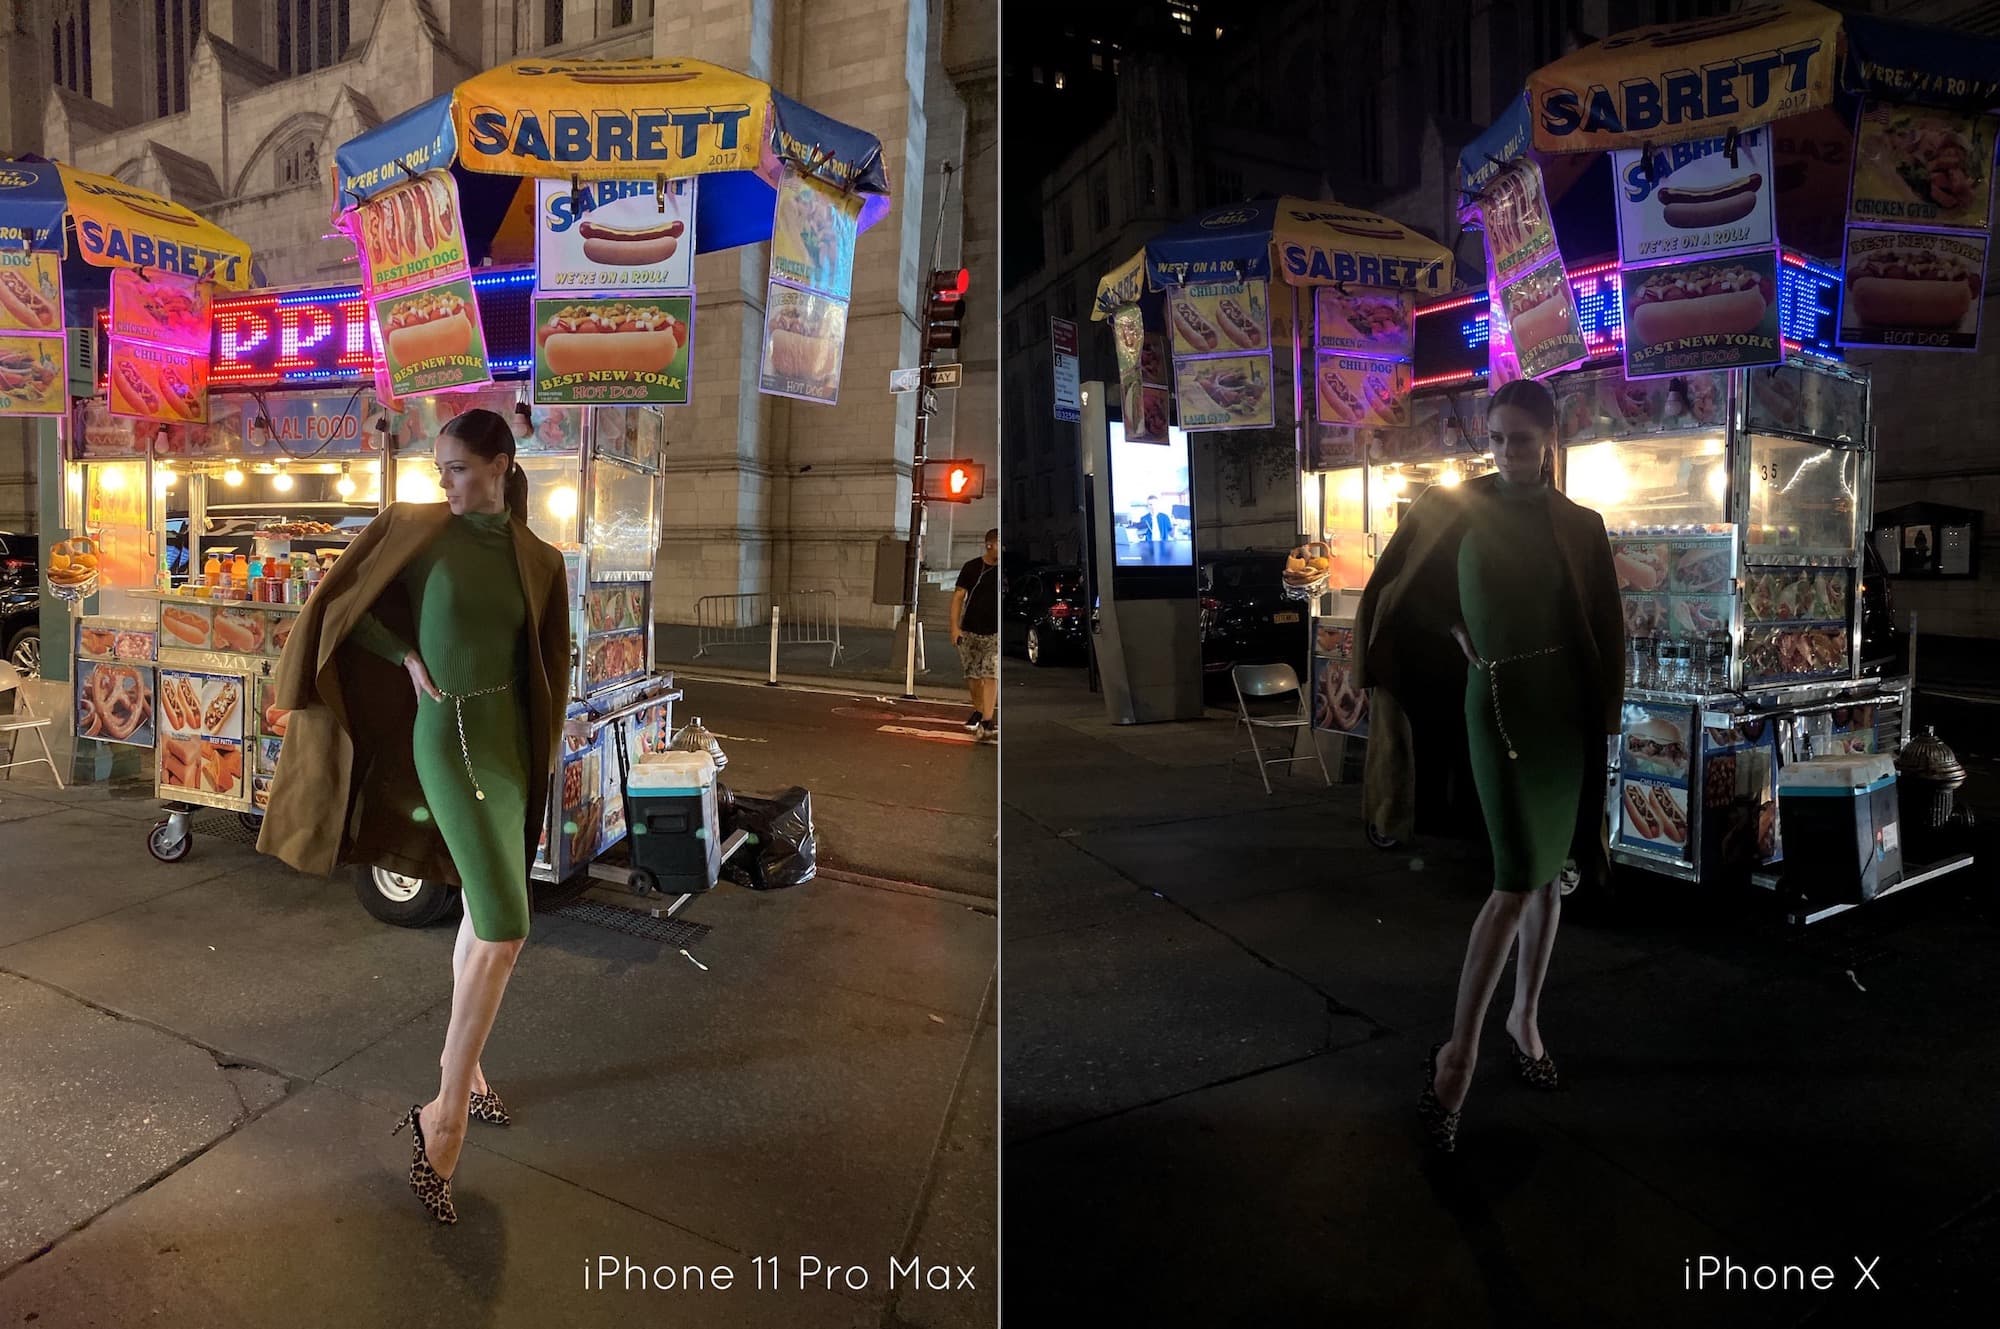 Two low-light environment images places side by side, with one taken using Night mode on iPhone 11 Pro and the other taken in standard mode on iPhone X